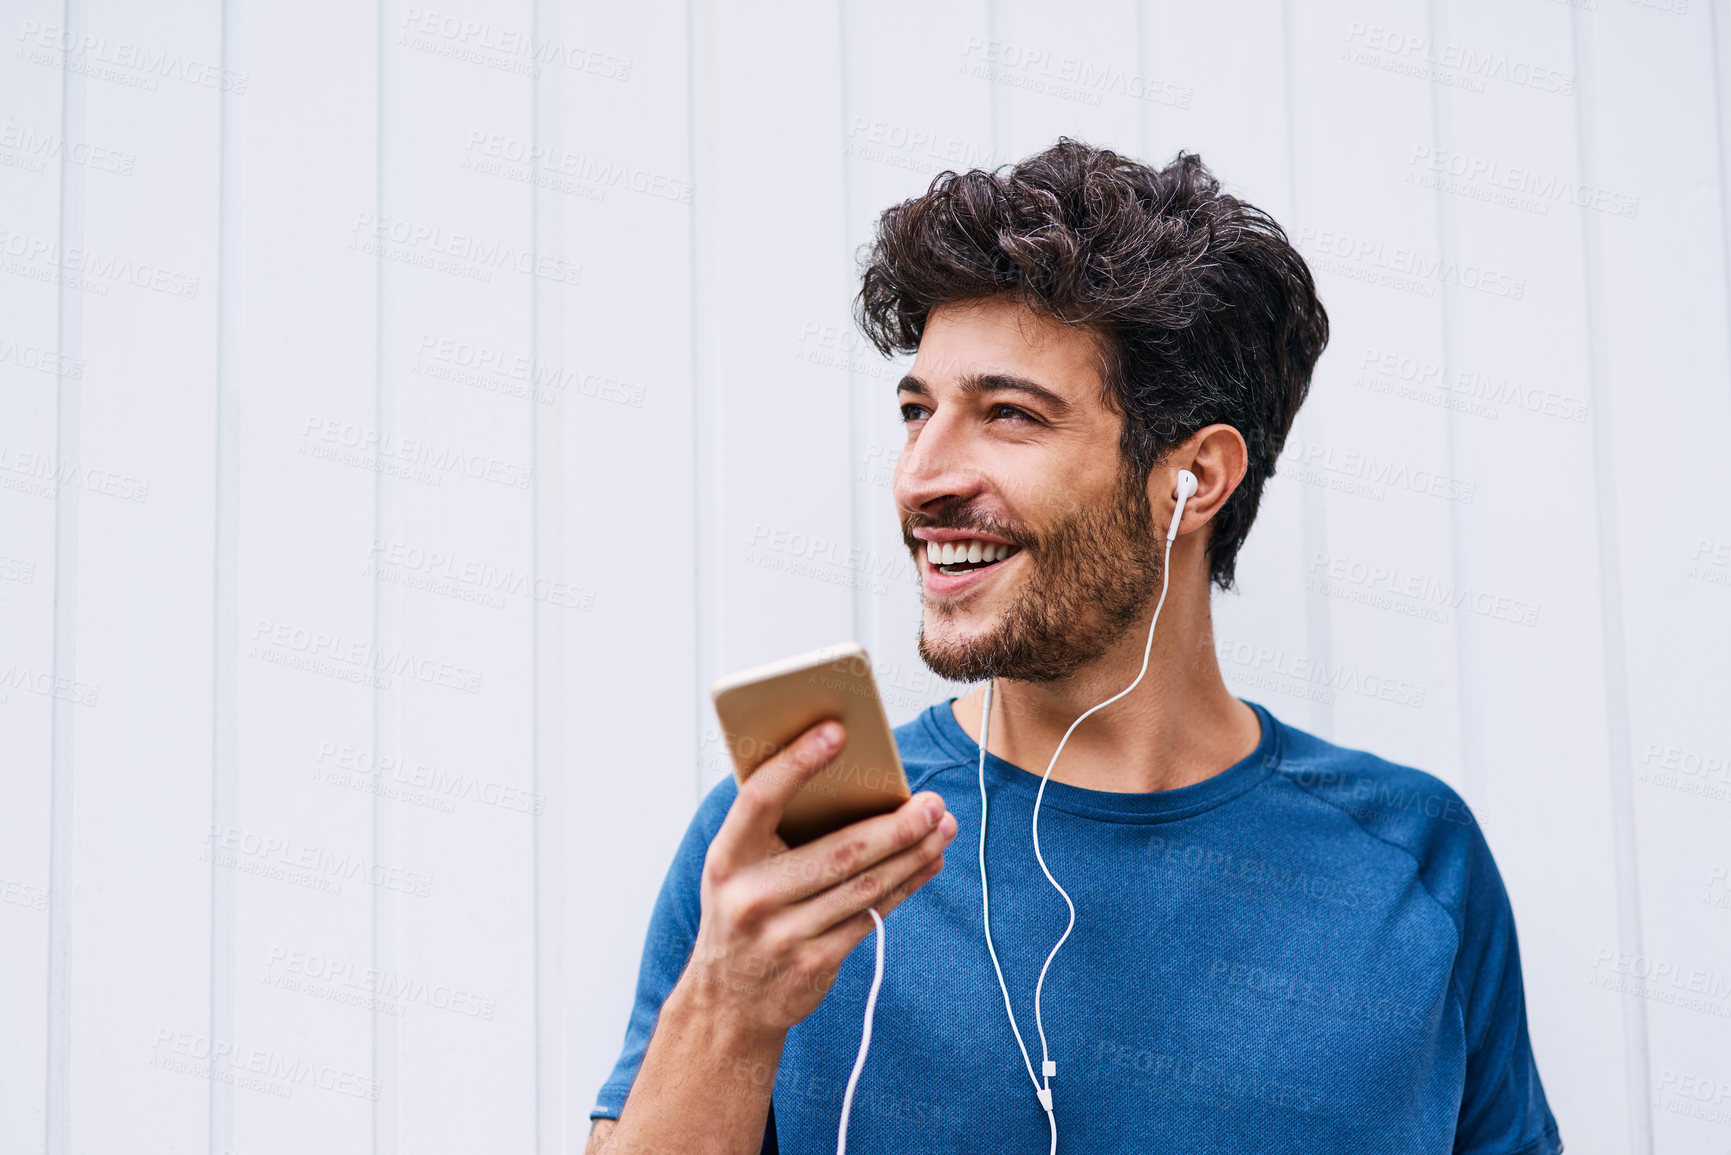 Buy stock photo Shot of a sporty young man listening to music while exercising outdoors